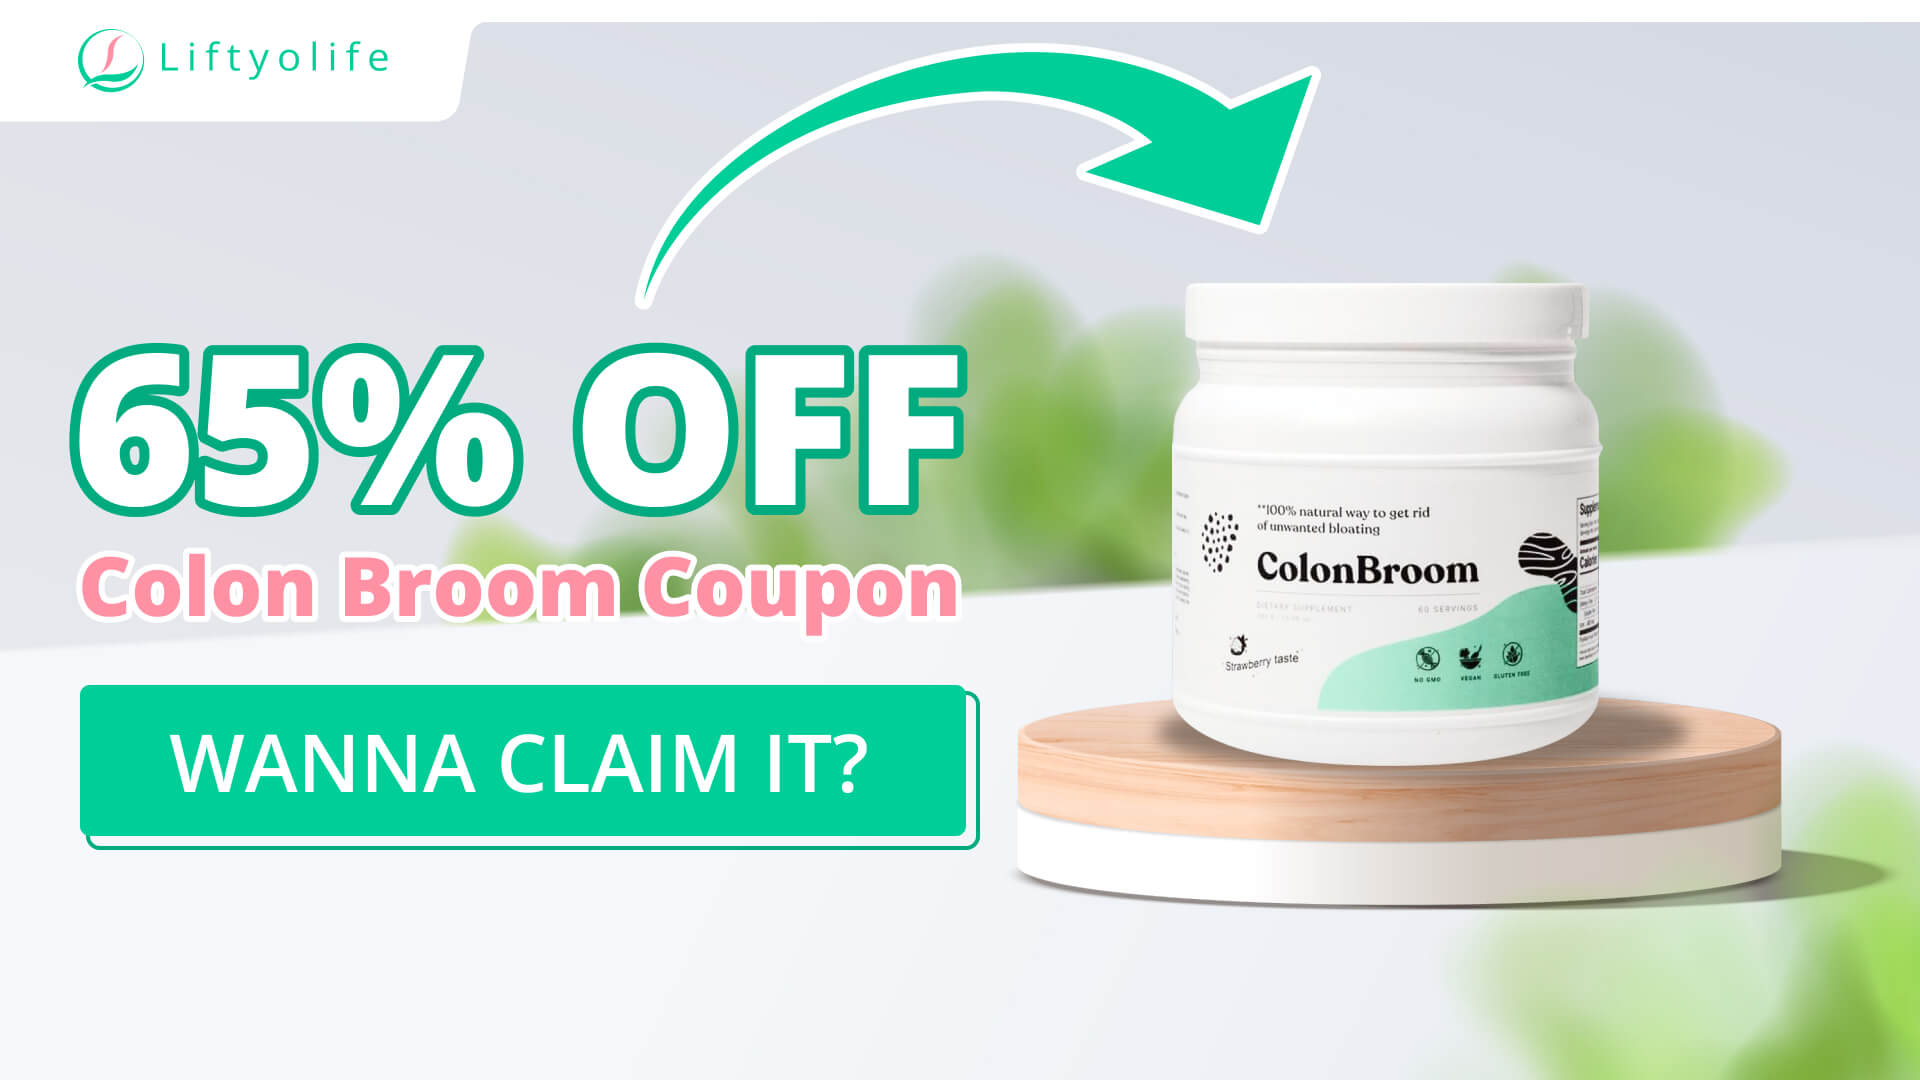 65% Off Colon Broom Coupons